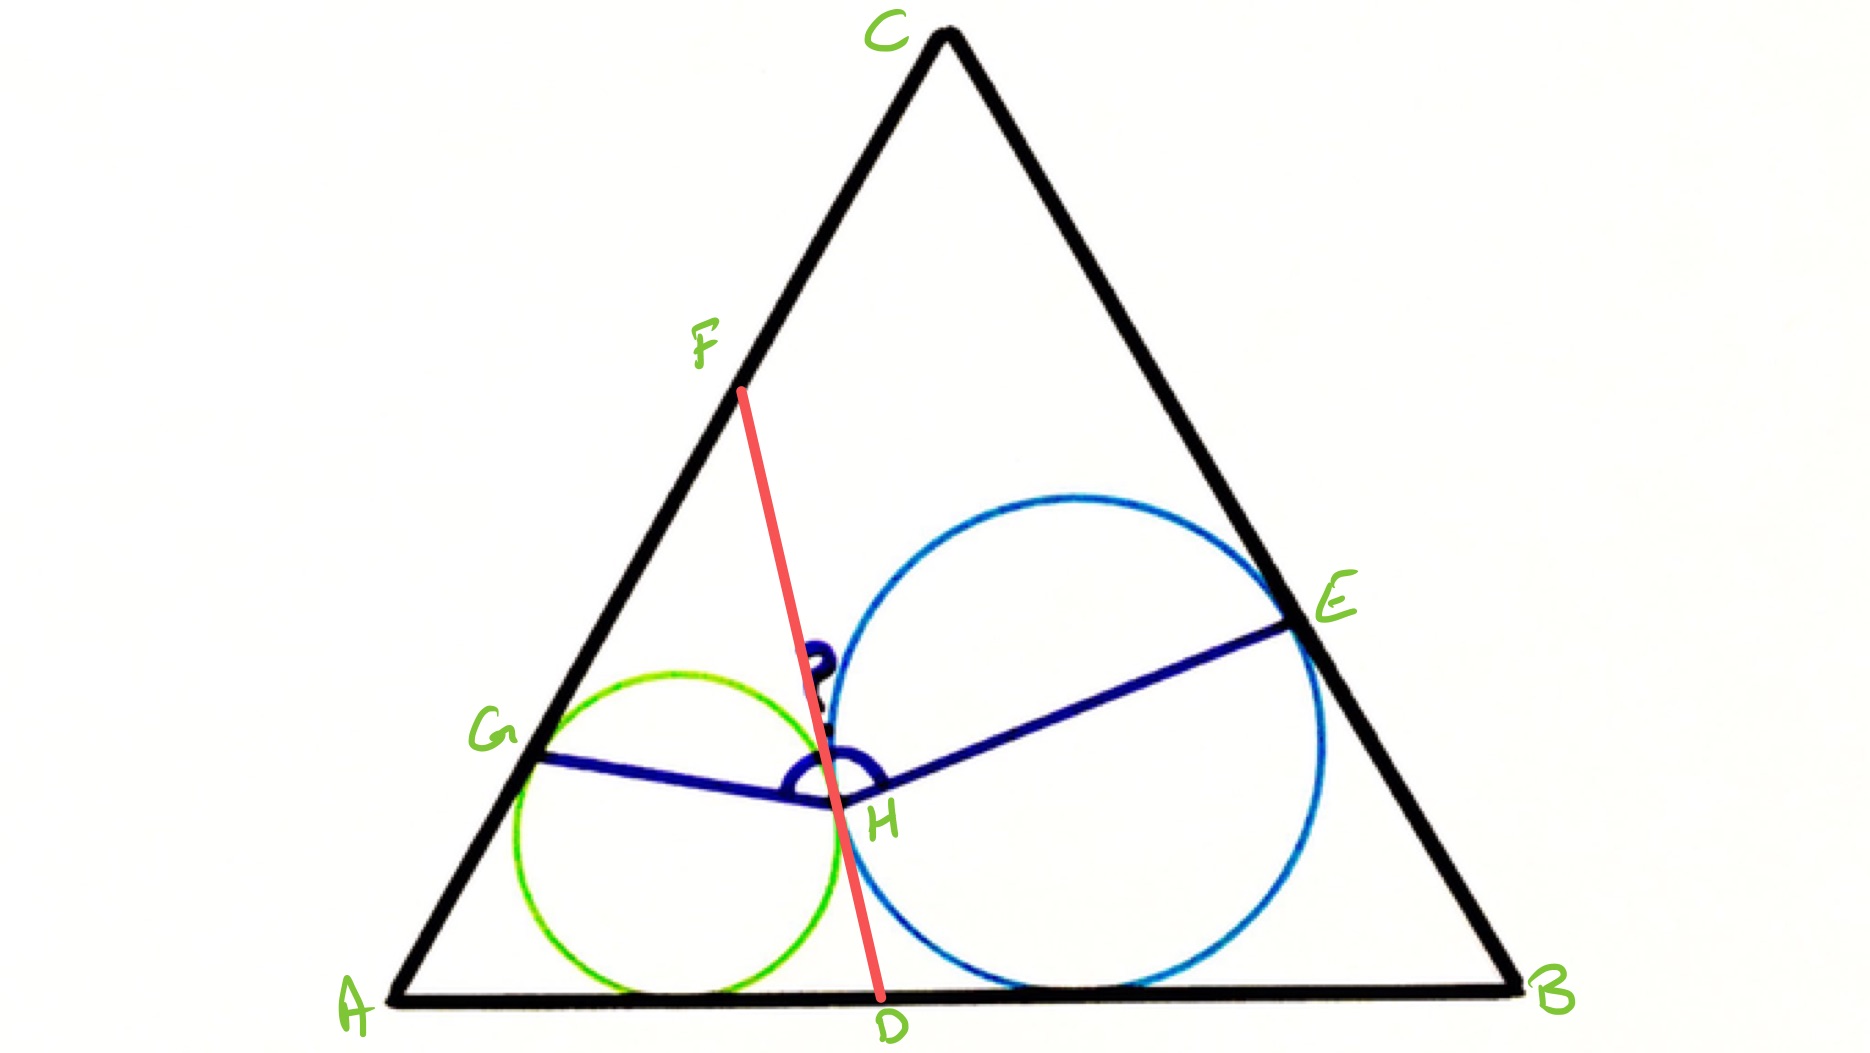 Two circles inside an equilateral triangle labelled